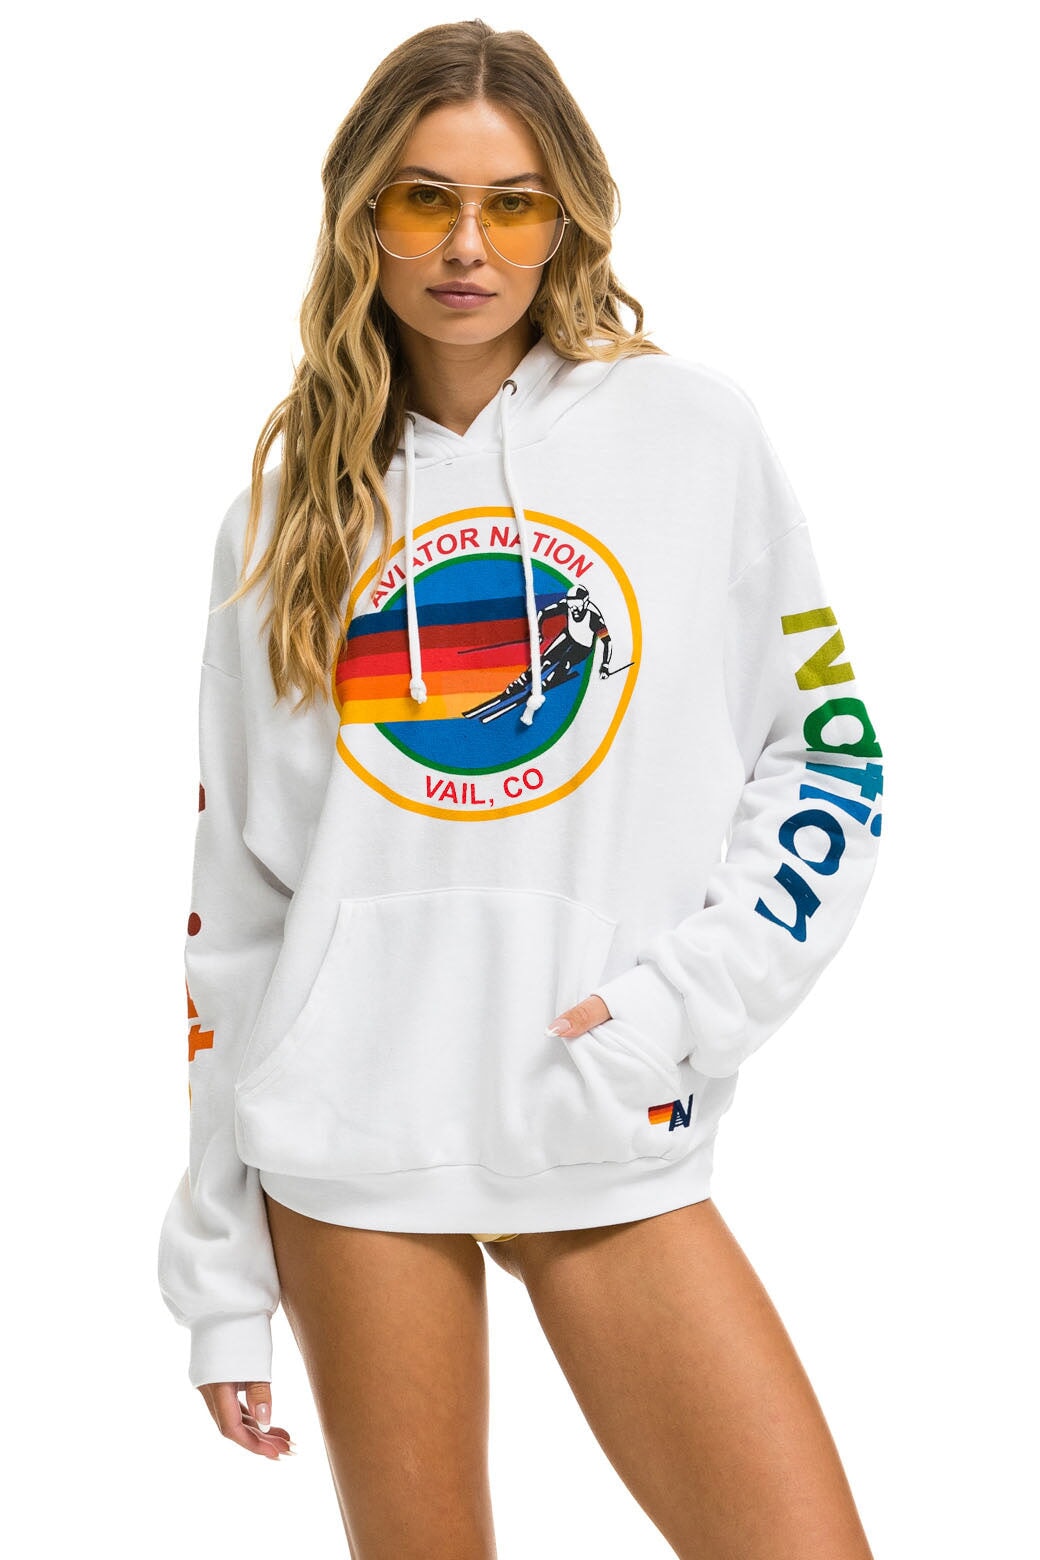 AVIATOR NATION VAIL RELAXED PULLOVER HOODIE - WHITE Hoodie Aviator Nation 